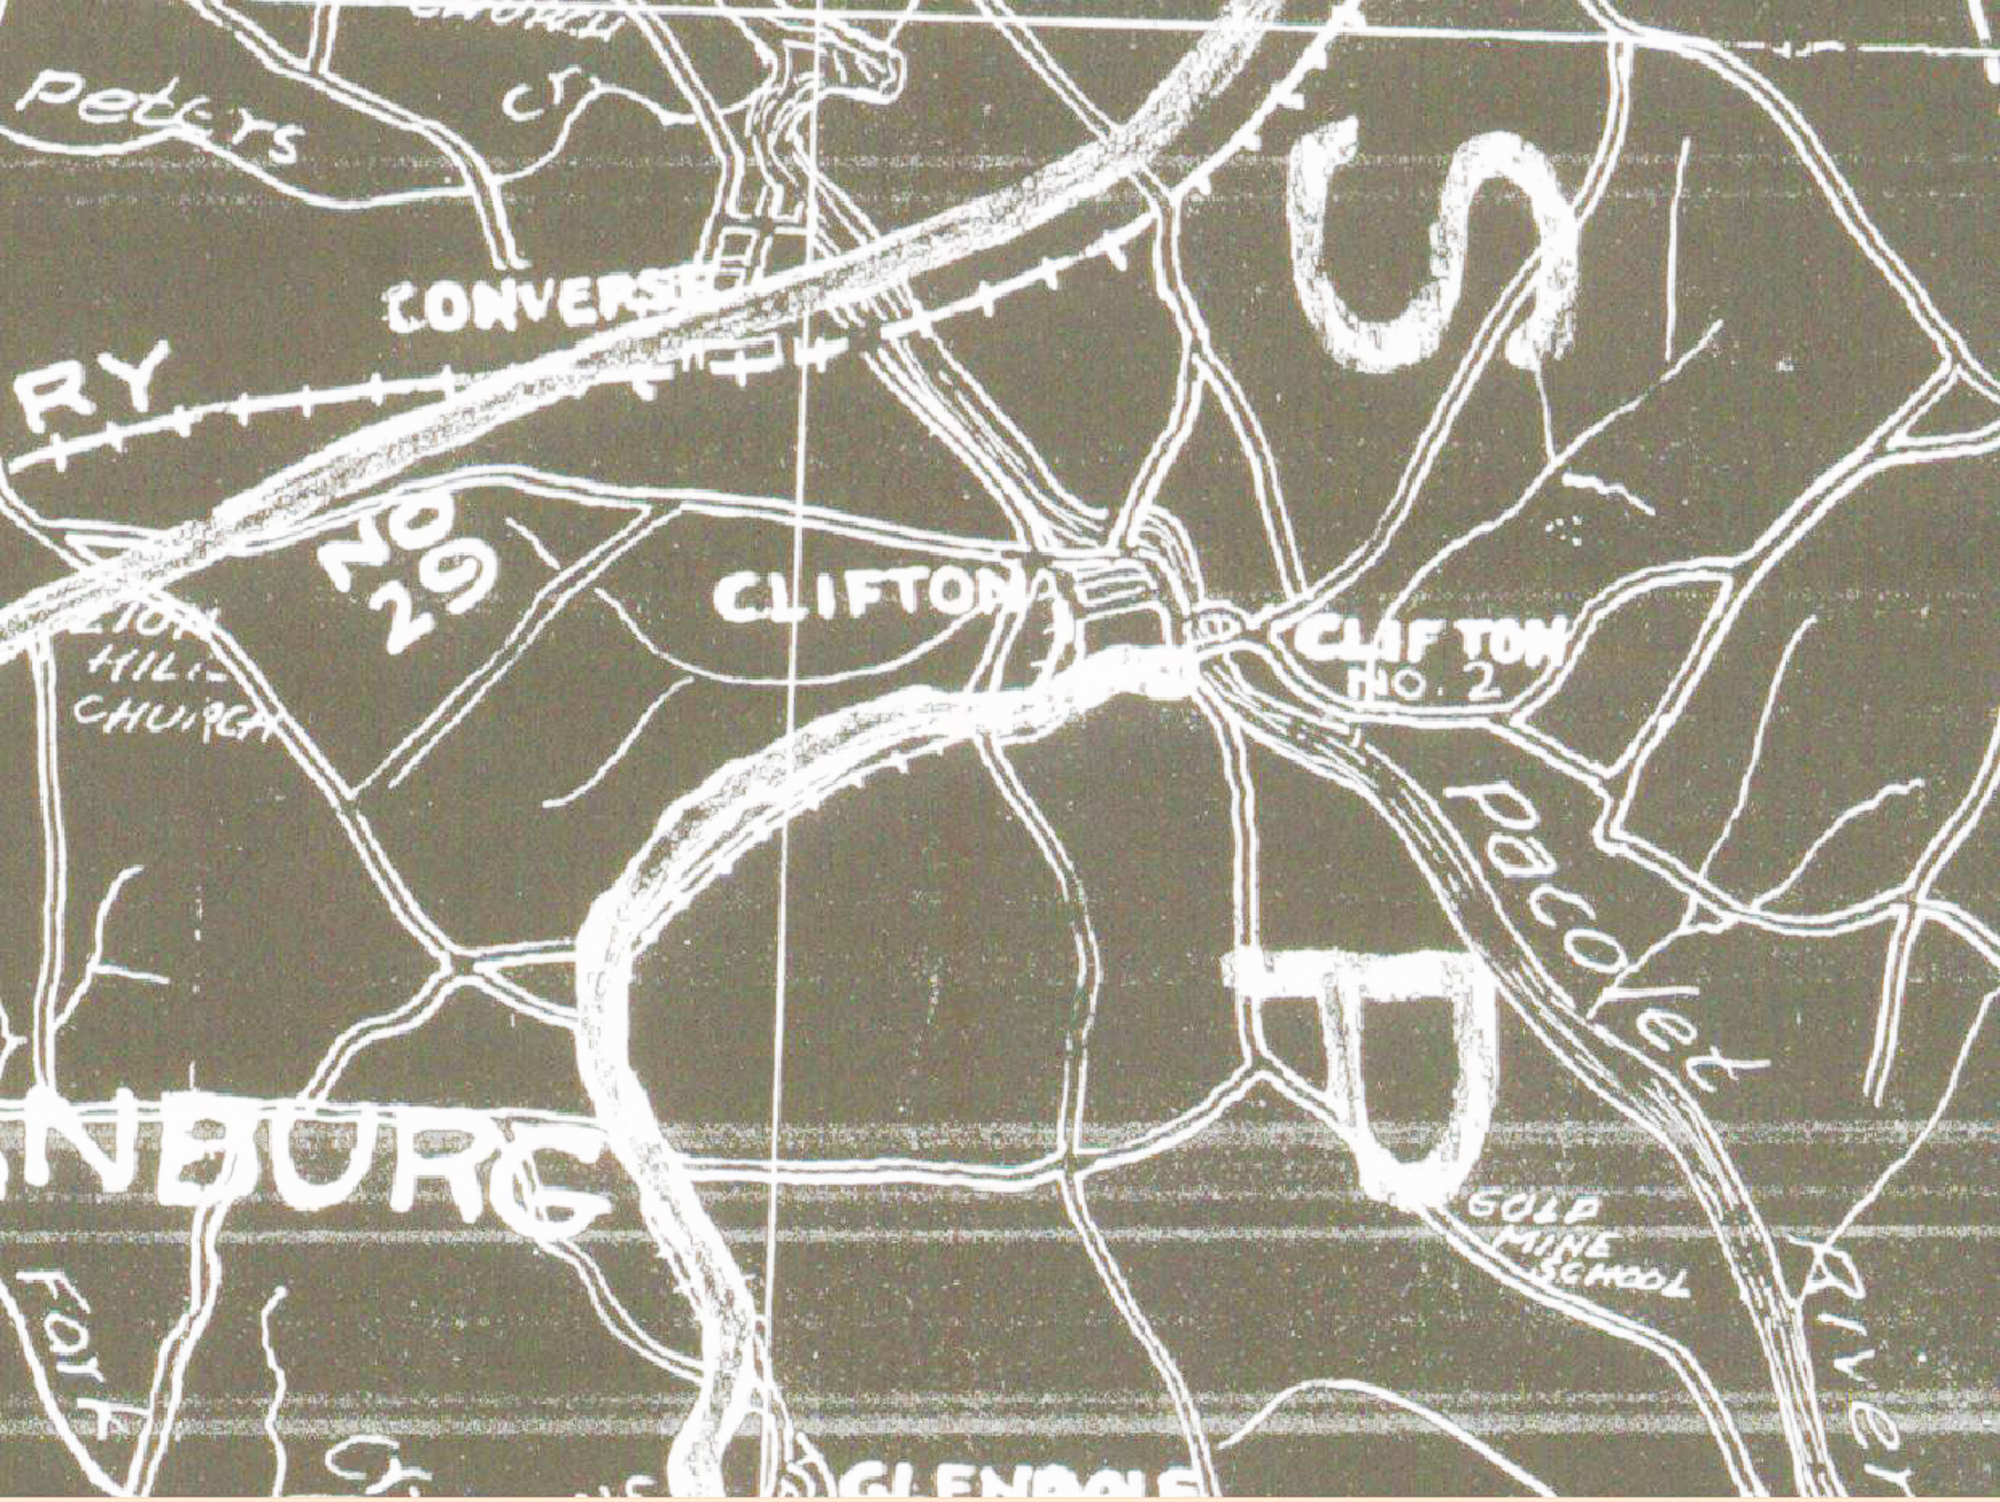 ENLARGEMENT OF THE CONVERSE MAP - AMOS COLLECTION